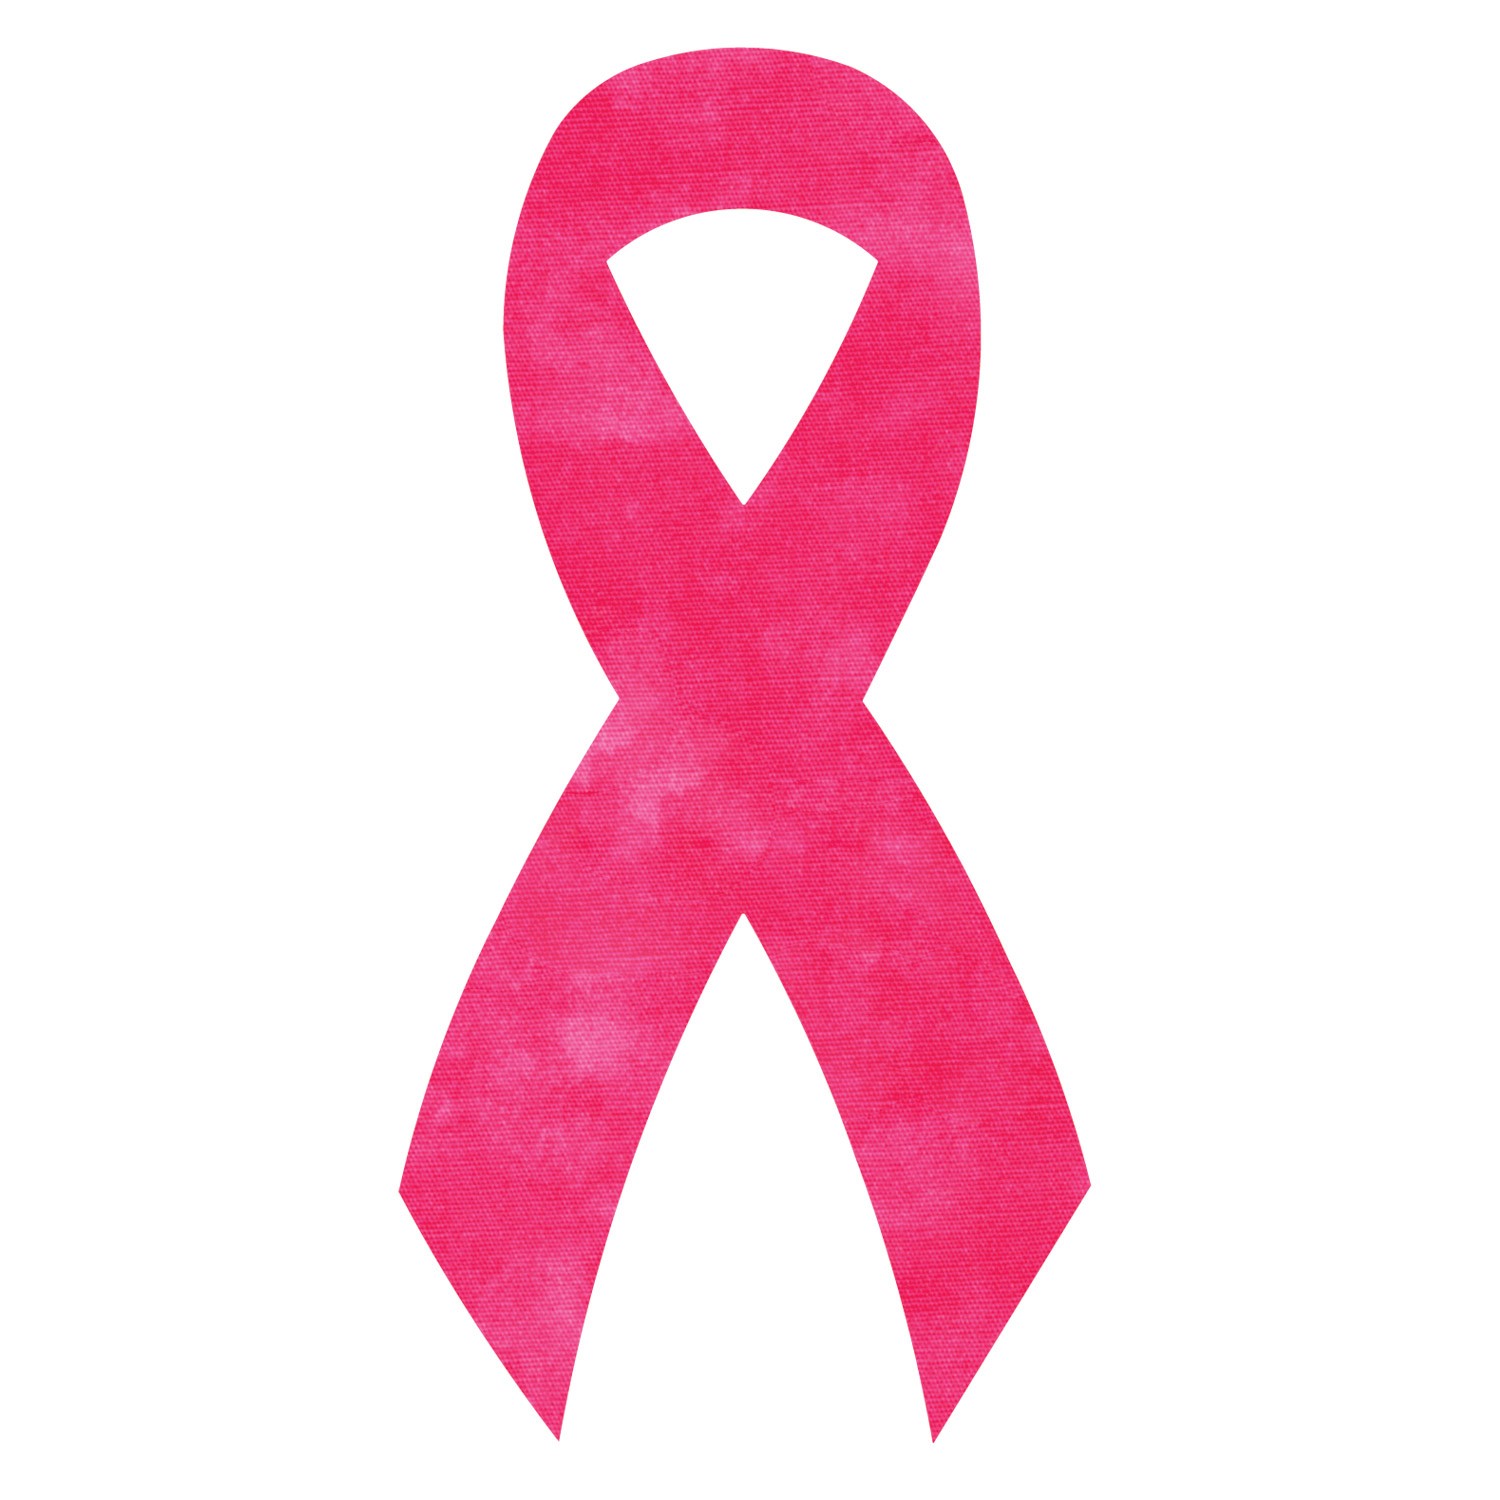 Pink Breast Cancer Ribbon Clip Art - ClipArt Best